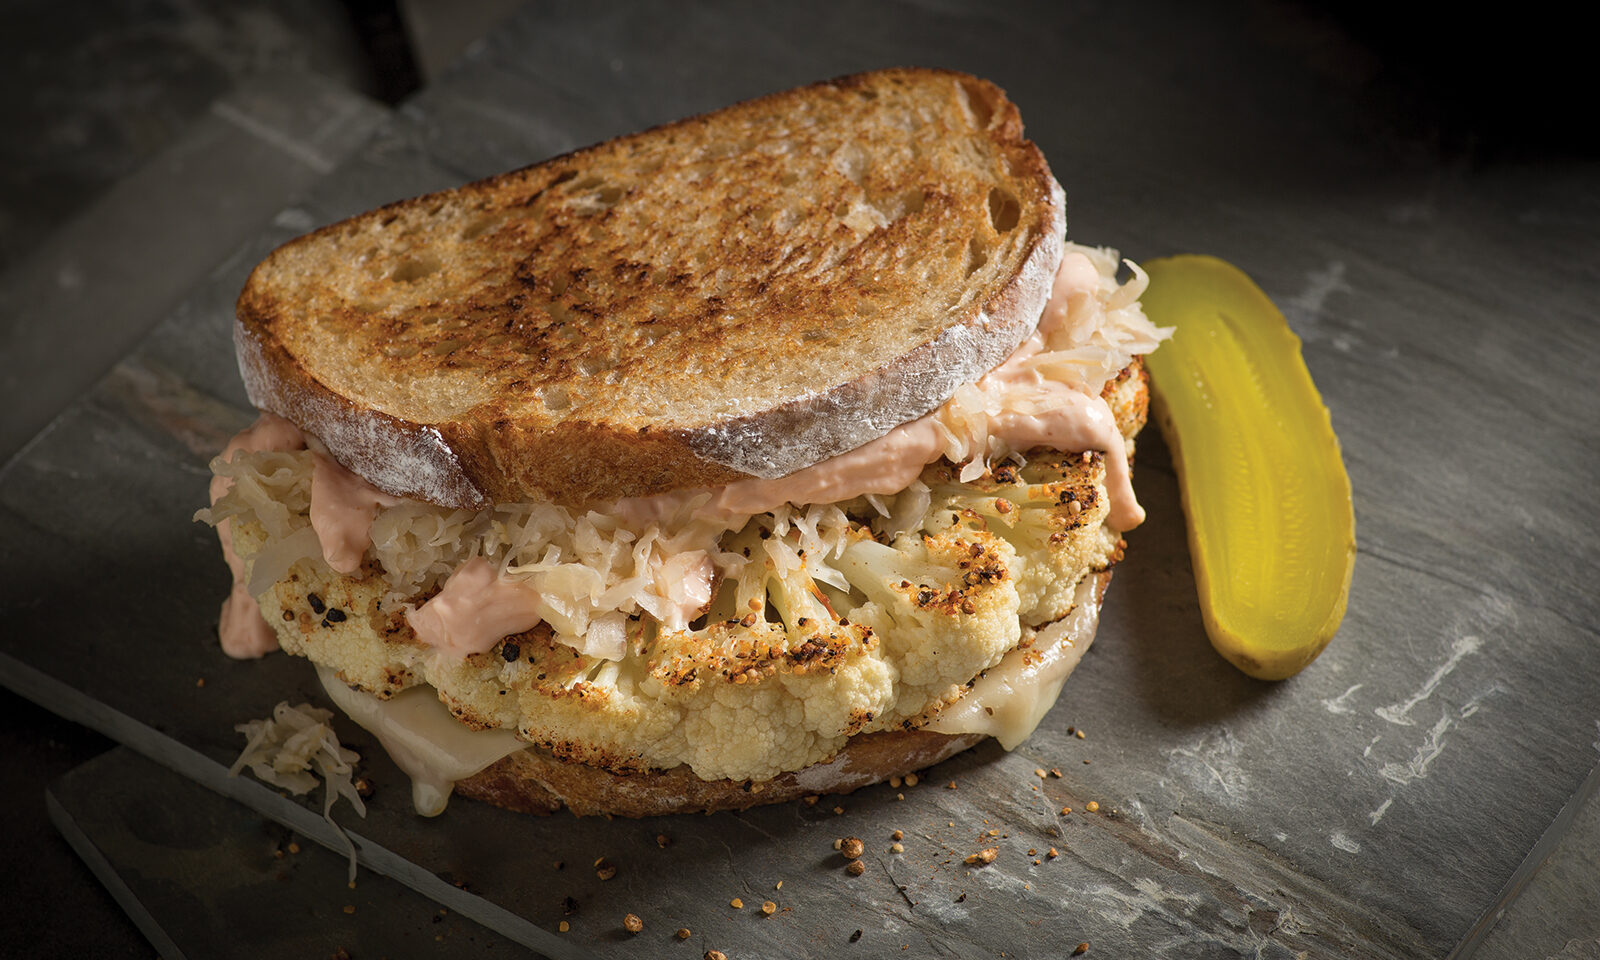 General ACE Bakery® Foodservice Sourdough Bistro with Cauliflower Reuben. Set in a dim black setting with a pickle.